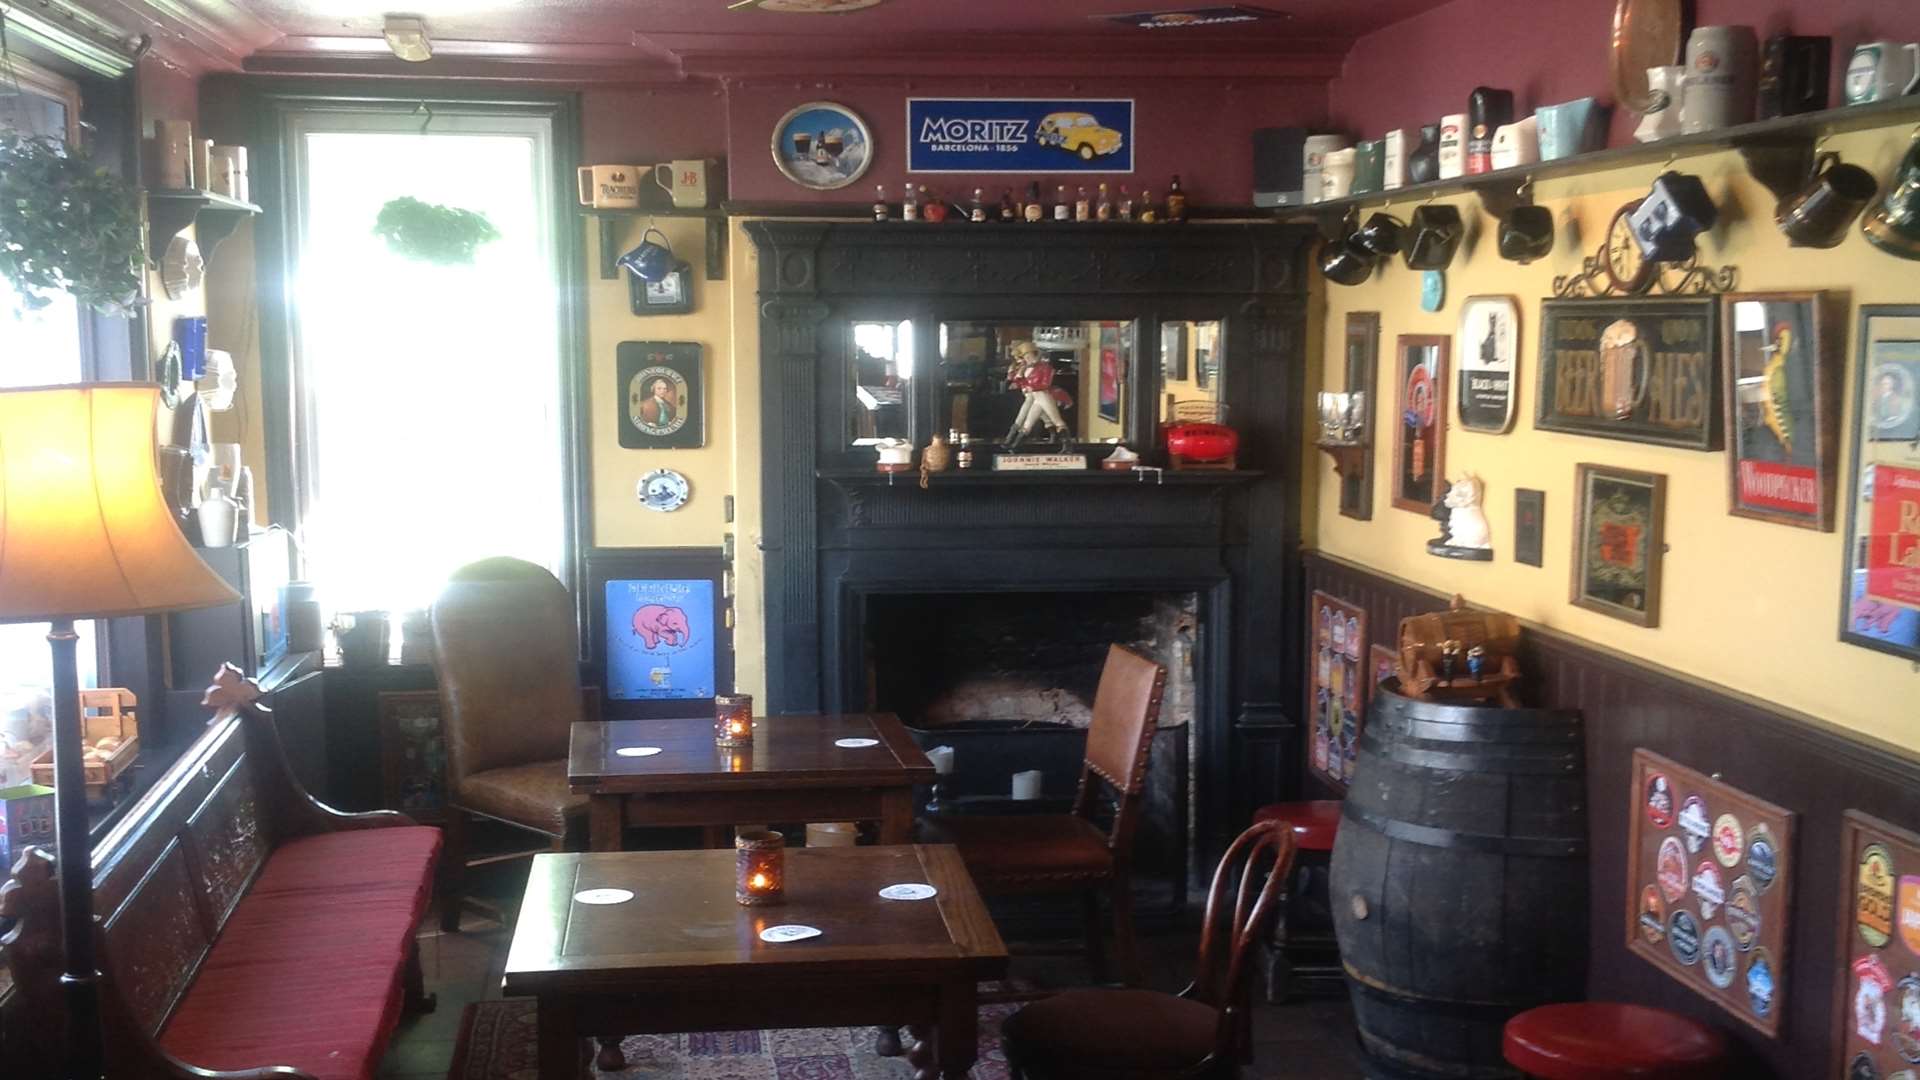 The Windmill's interior has been transformed